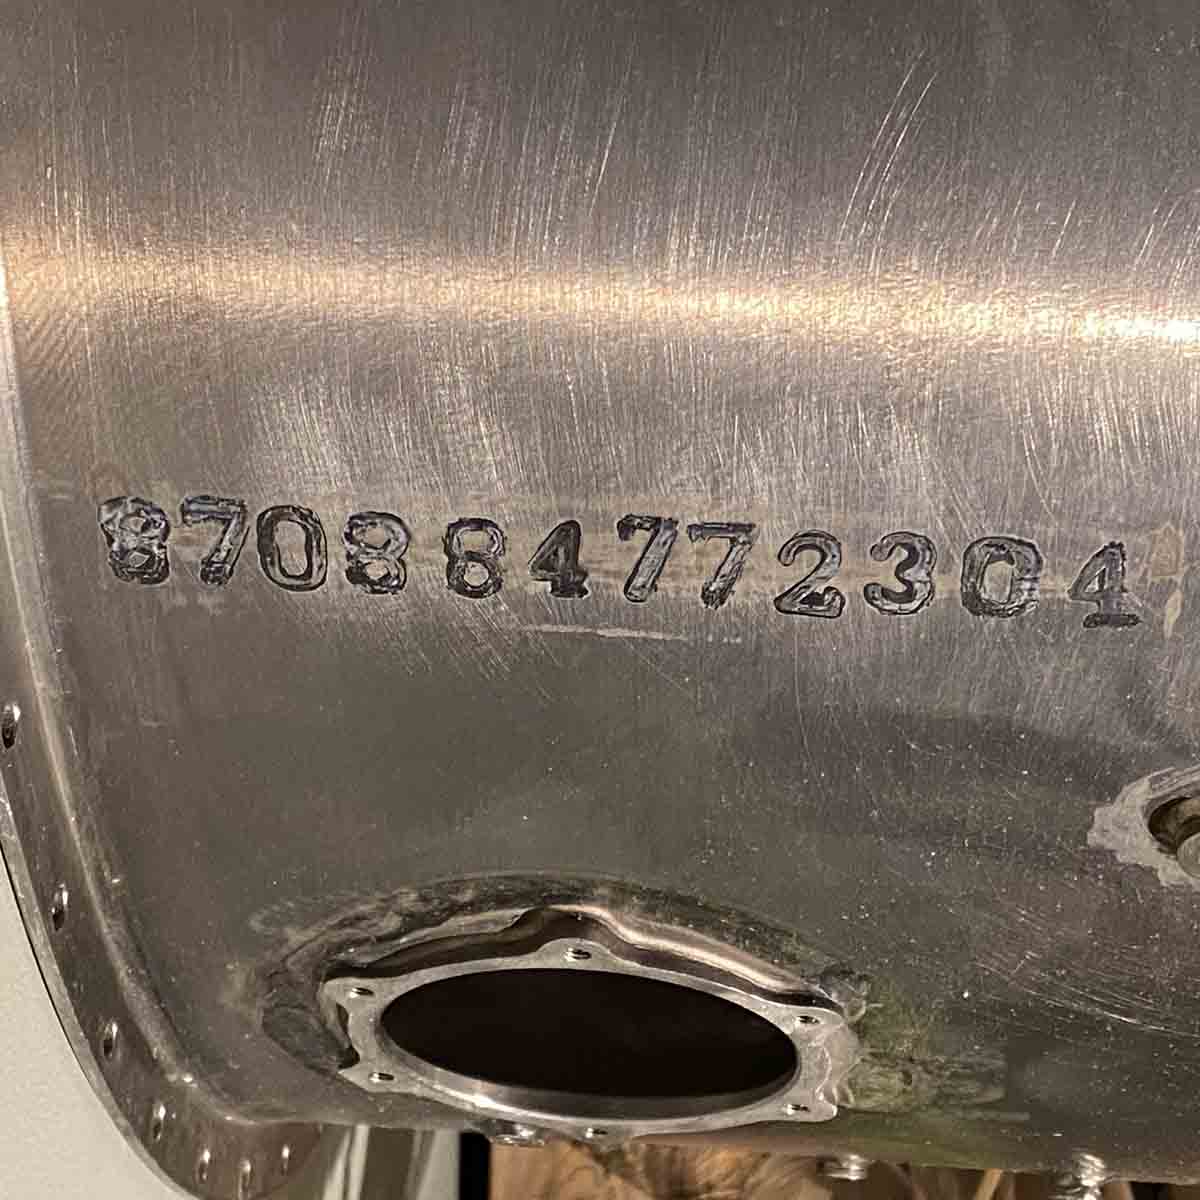 Serial number of the front body of Klimov RD-33 jet engine.